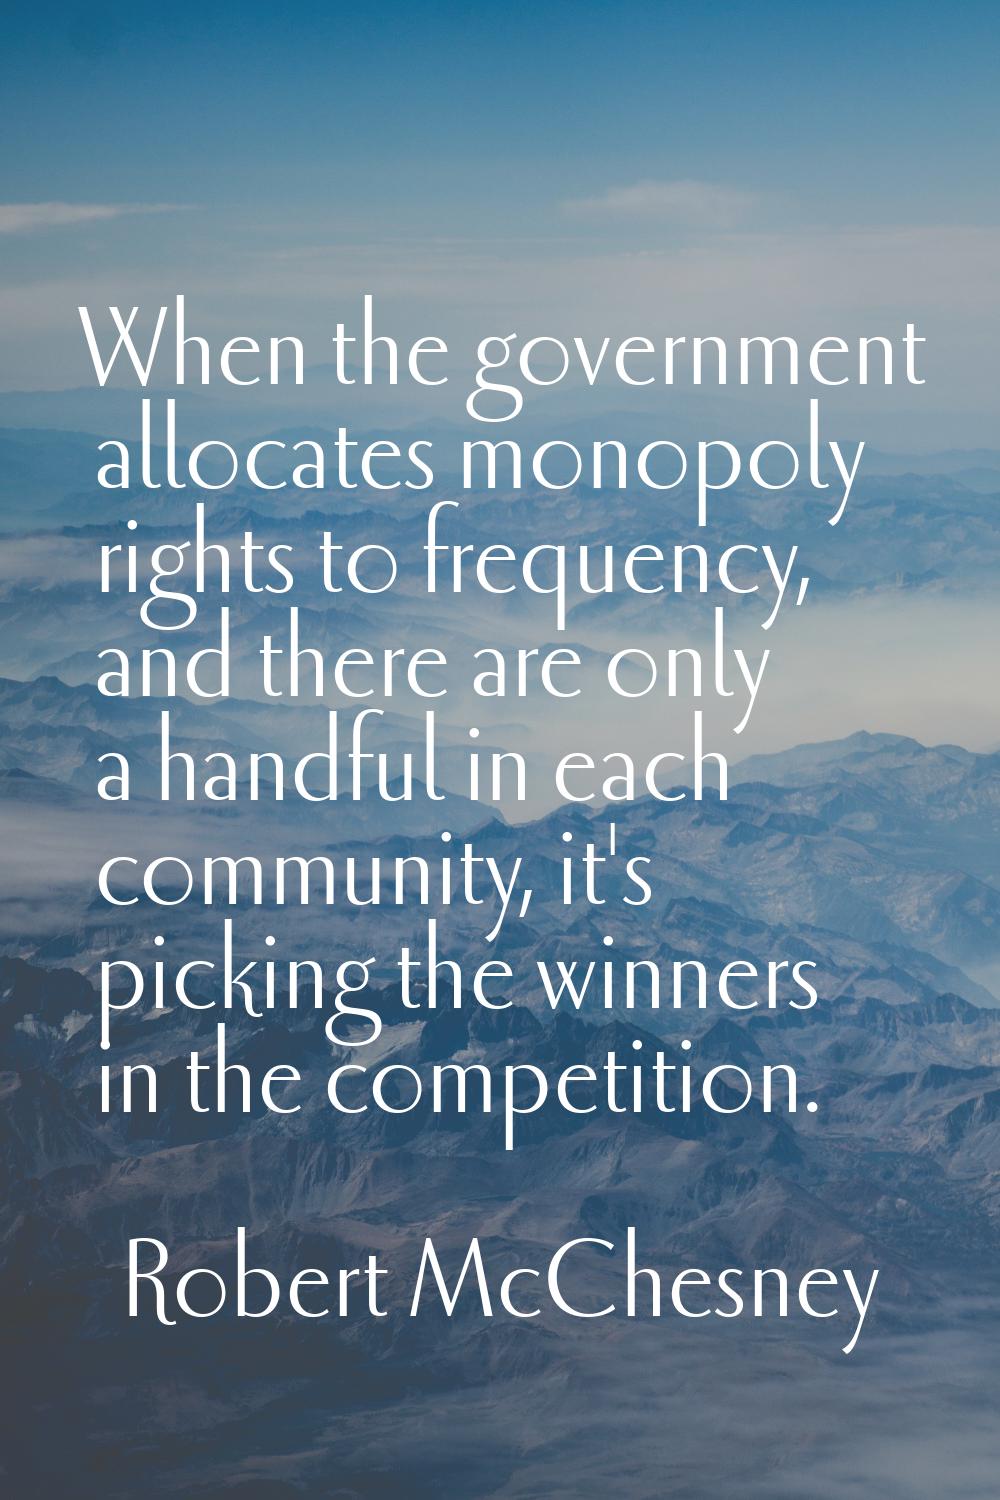 When the government allocates monopoly rights to frequency, and there are only a handful in each co